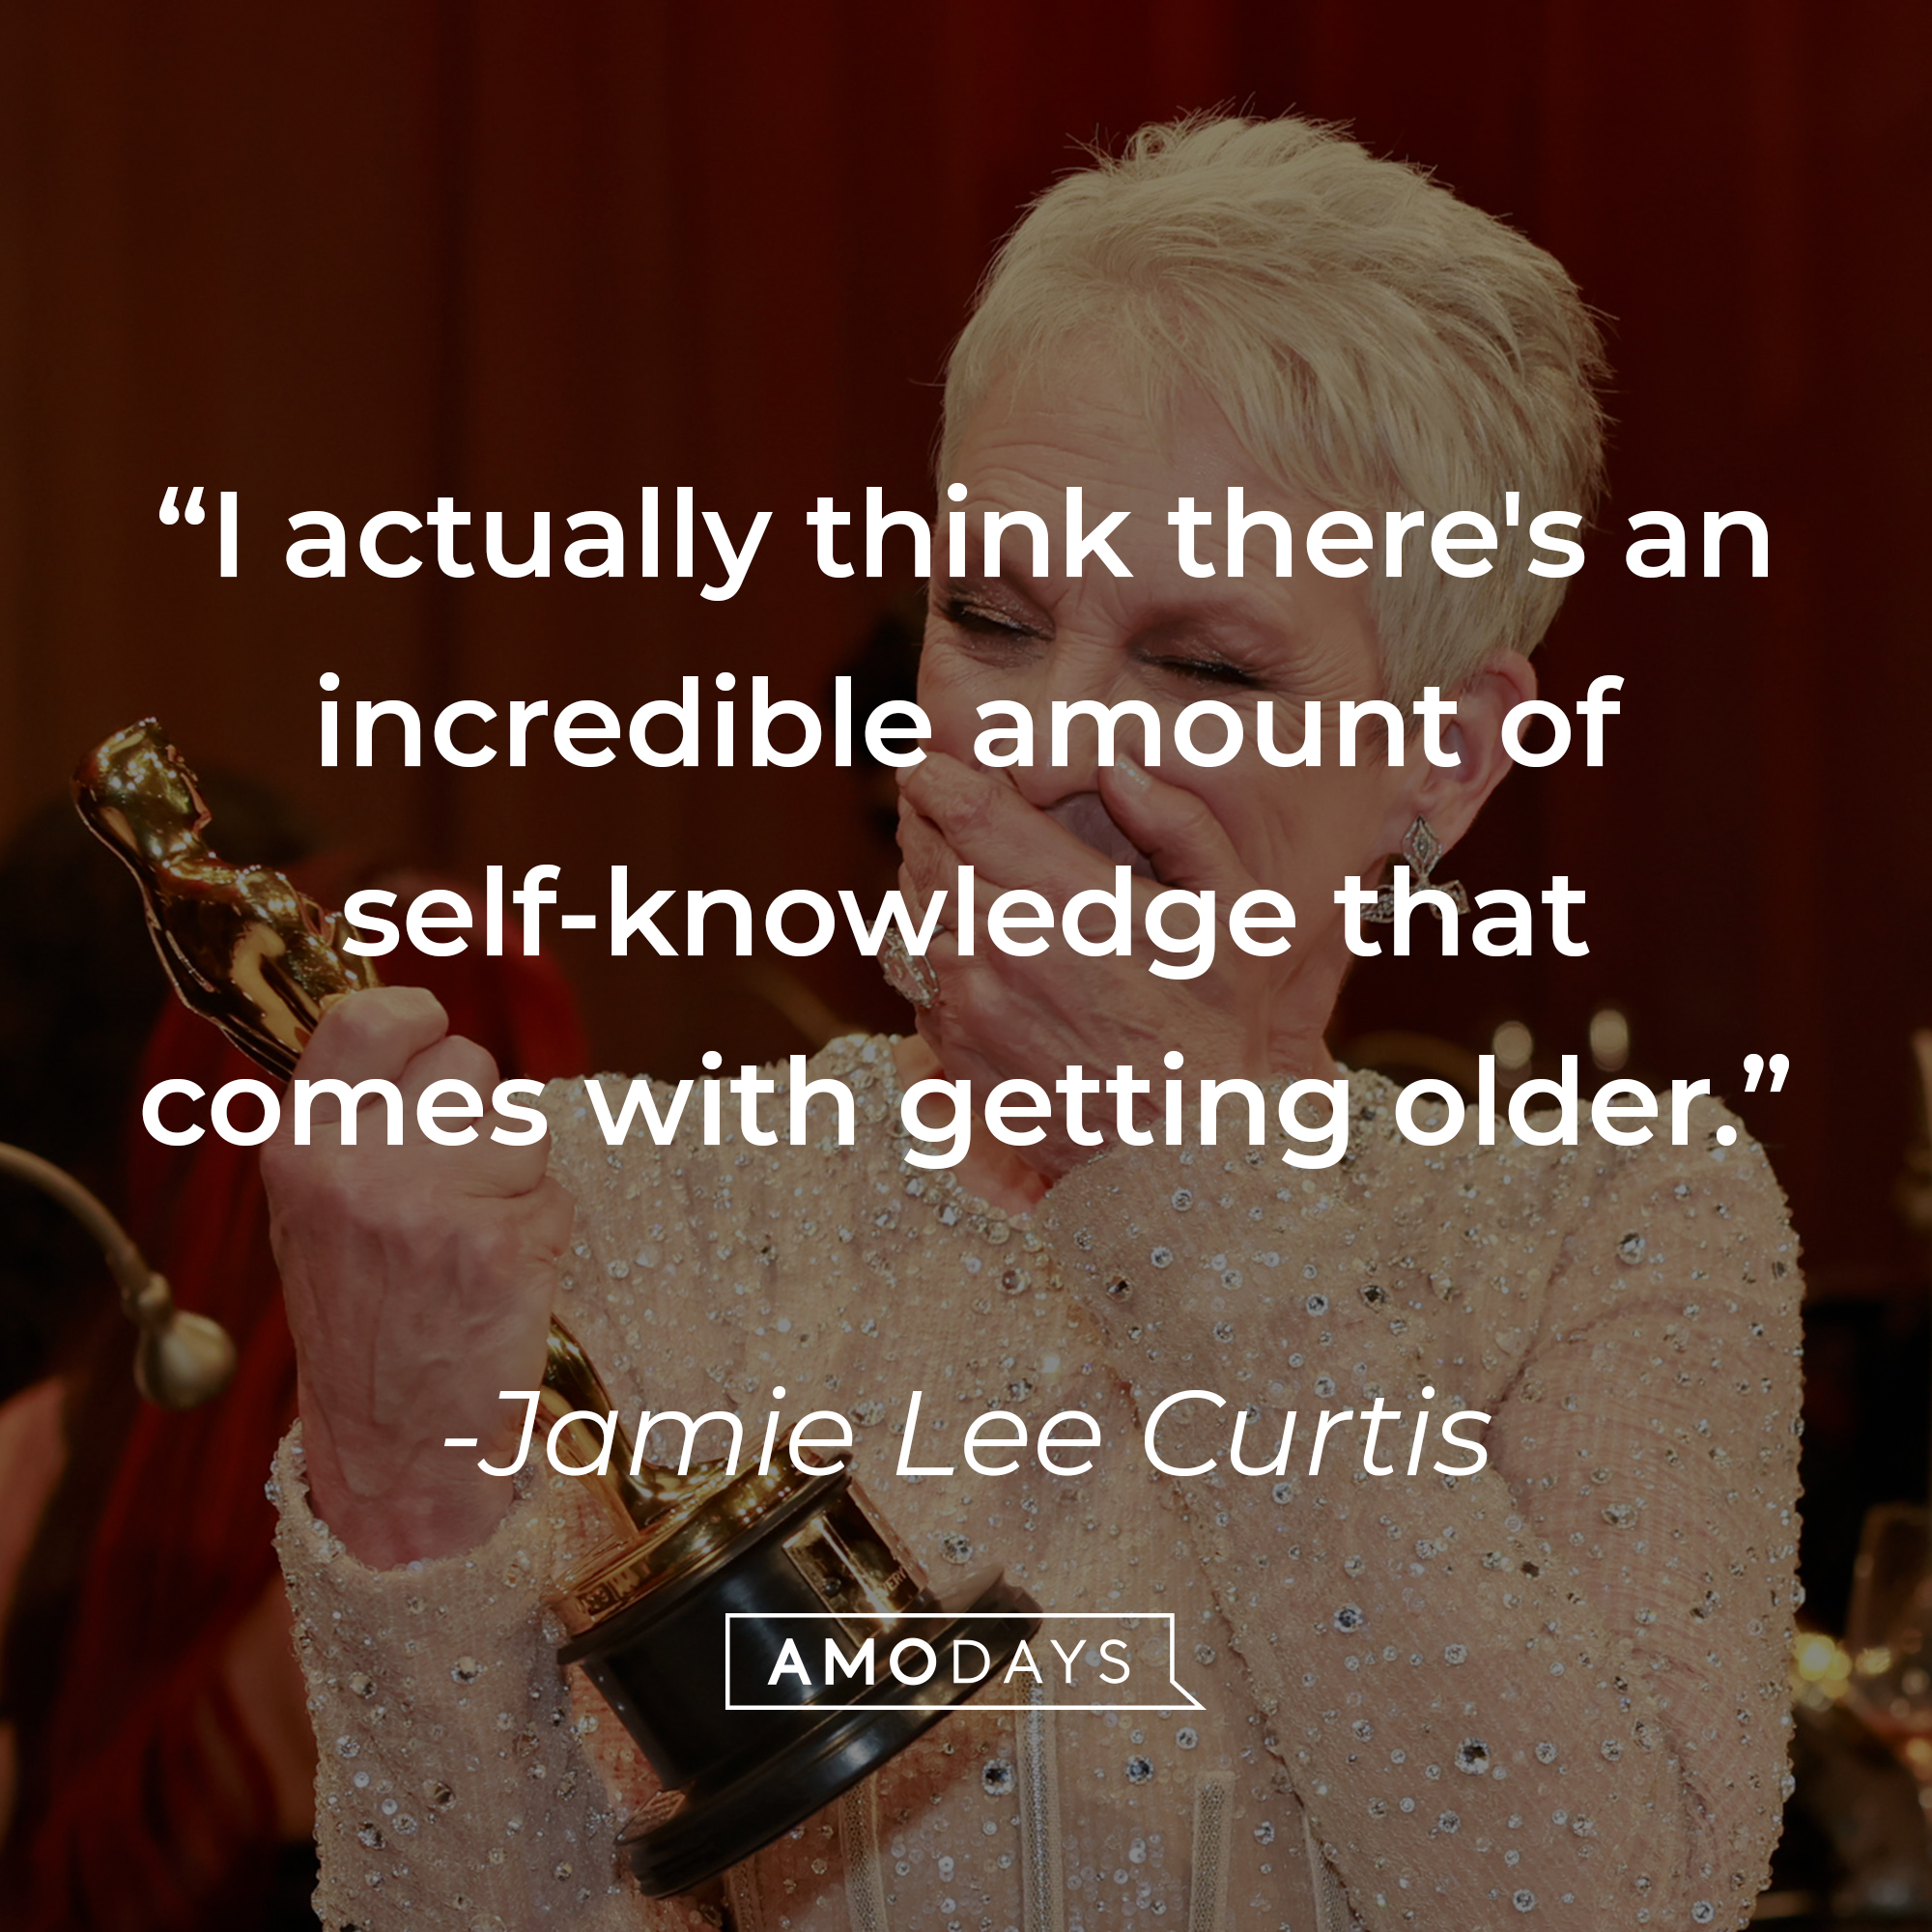 An image of Jamie Lee Curtis, with her quote: “I actually think there's an incredible amount of self-knowledge that comes with getting older.” | Source: Getty Images